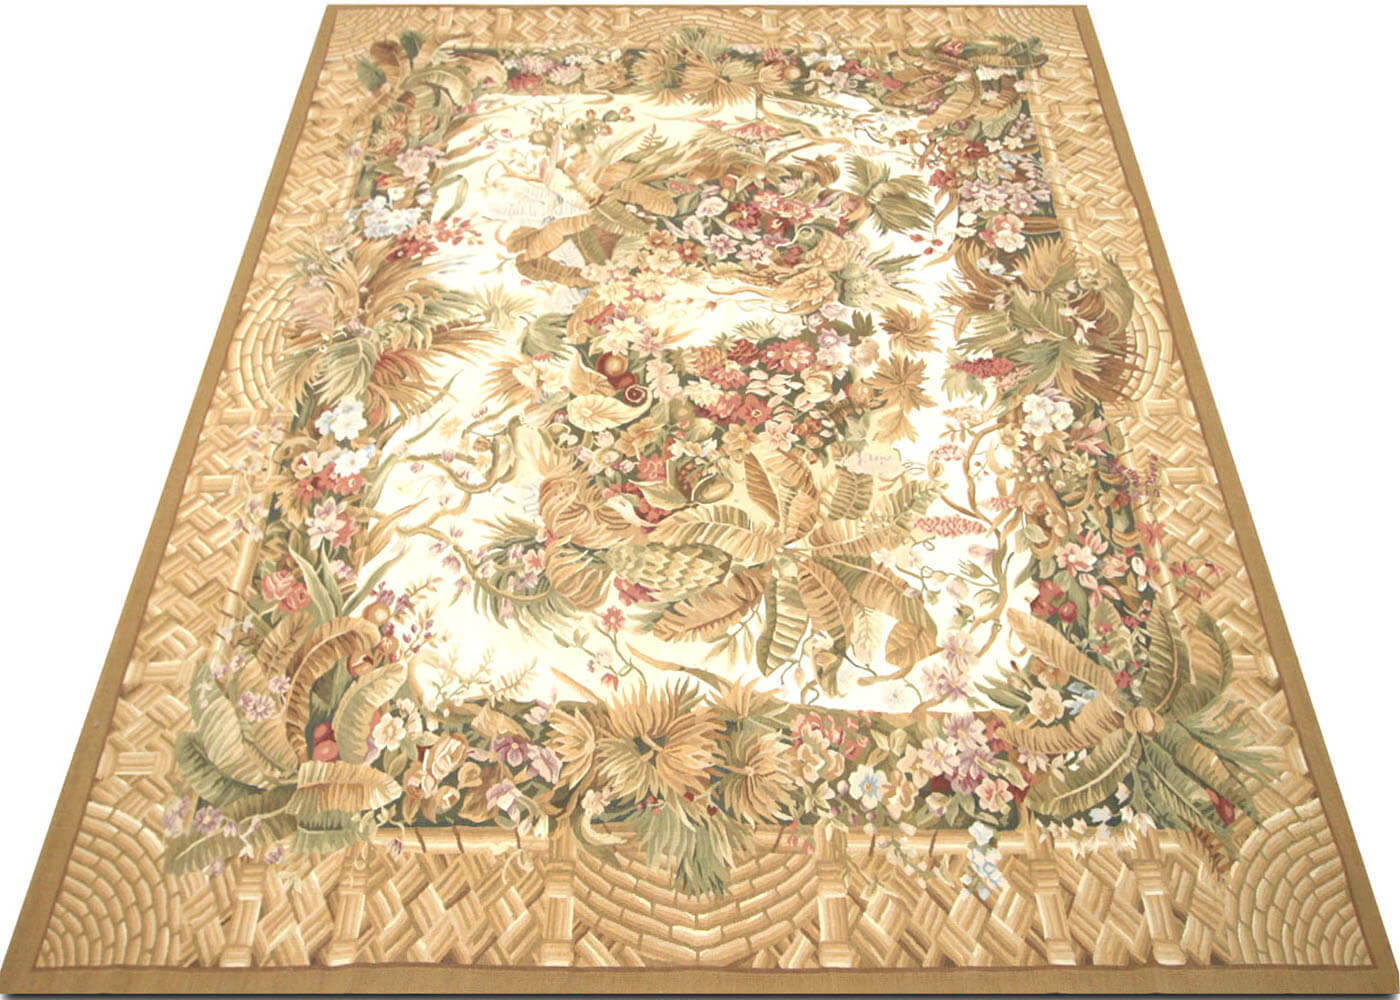 Vintage French Aubusson Rug - 7'10" x 10'3"